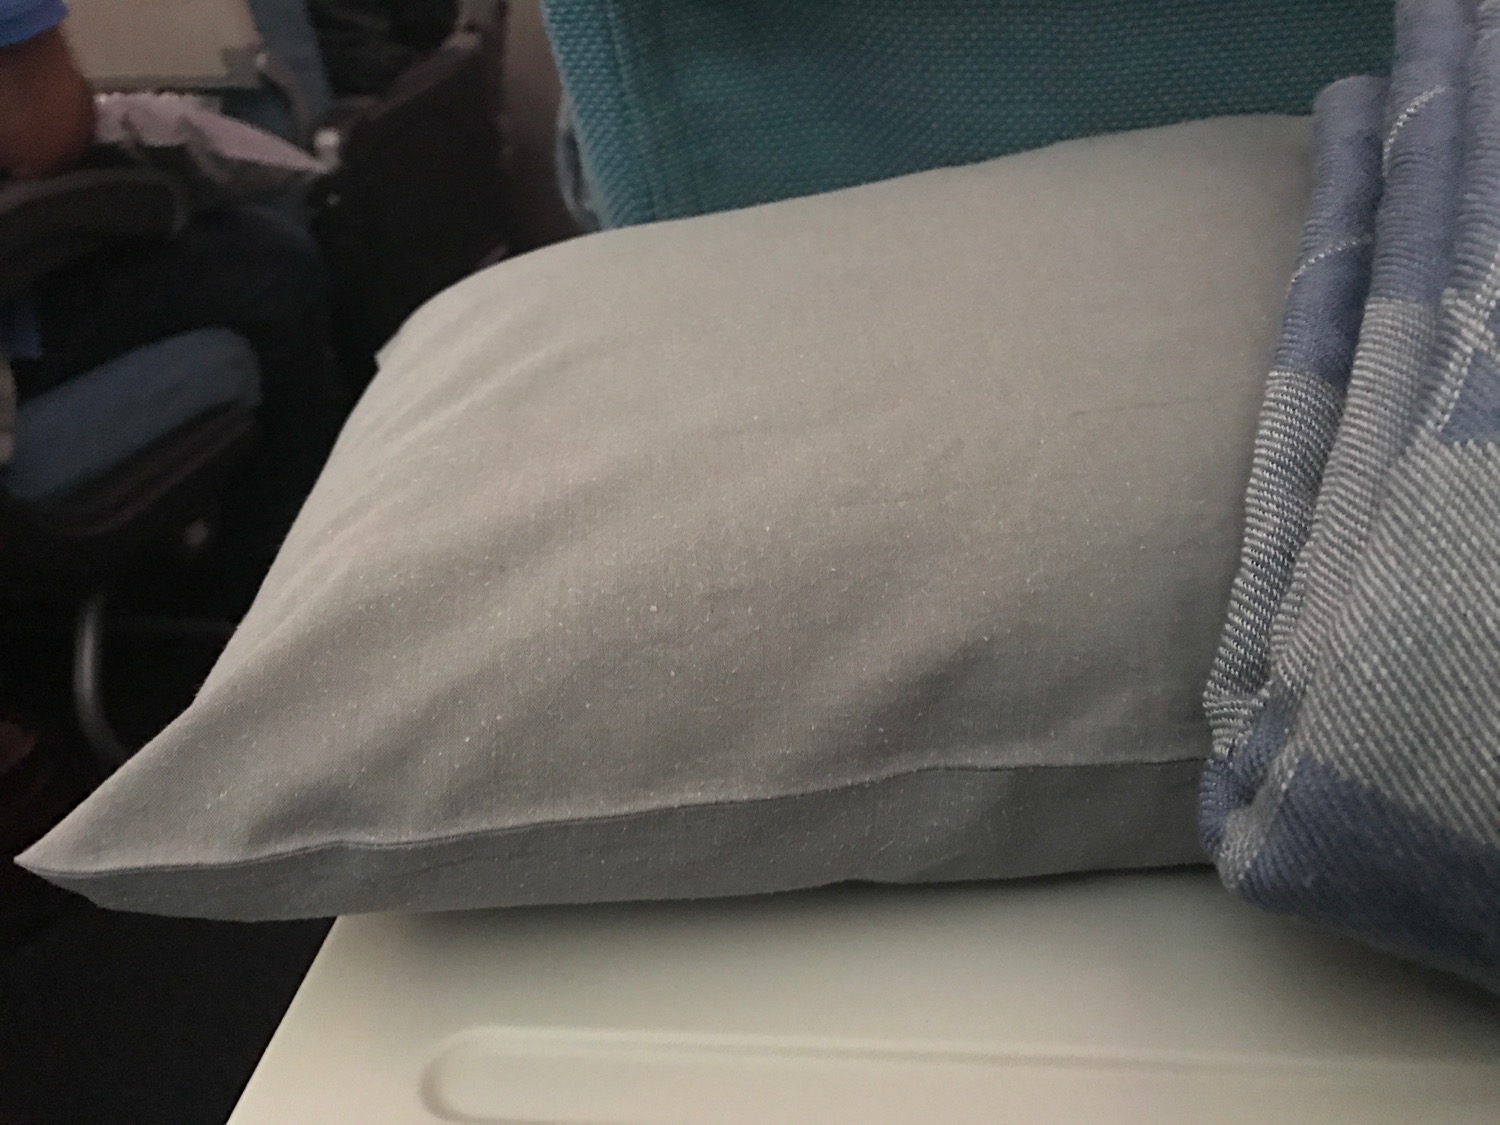 Turkish Airlines Economy Class Review 777-300 - 48